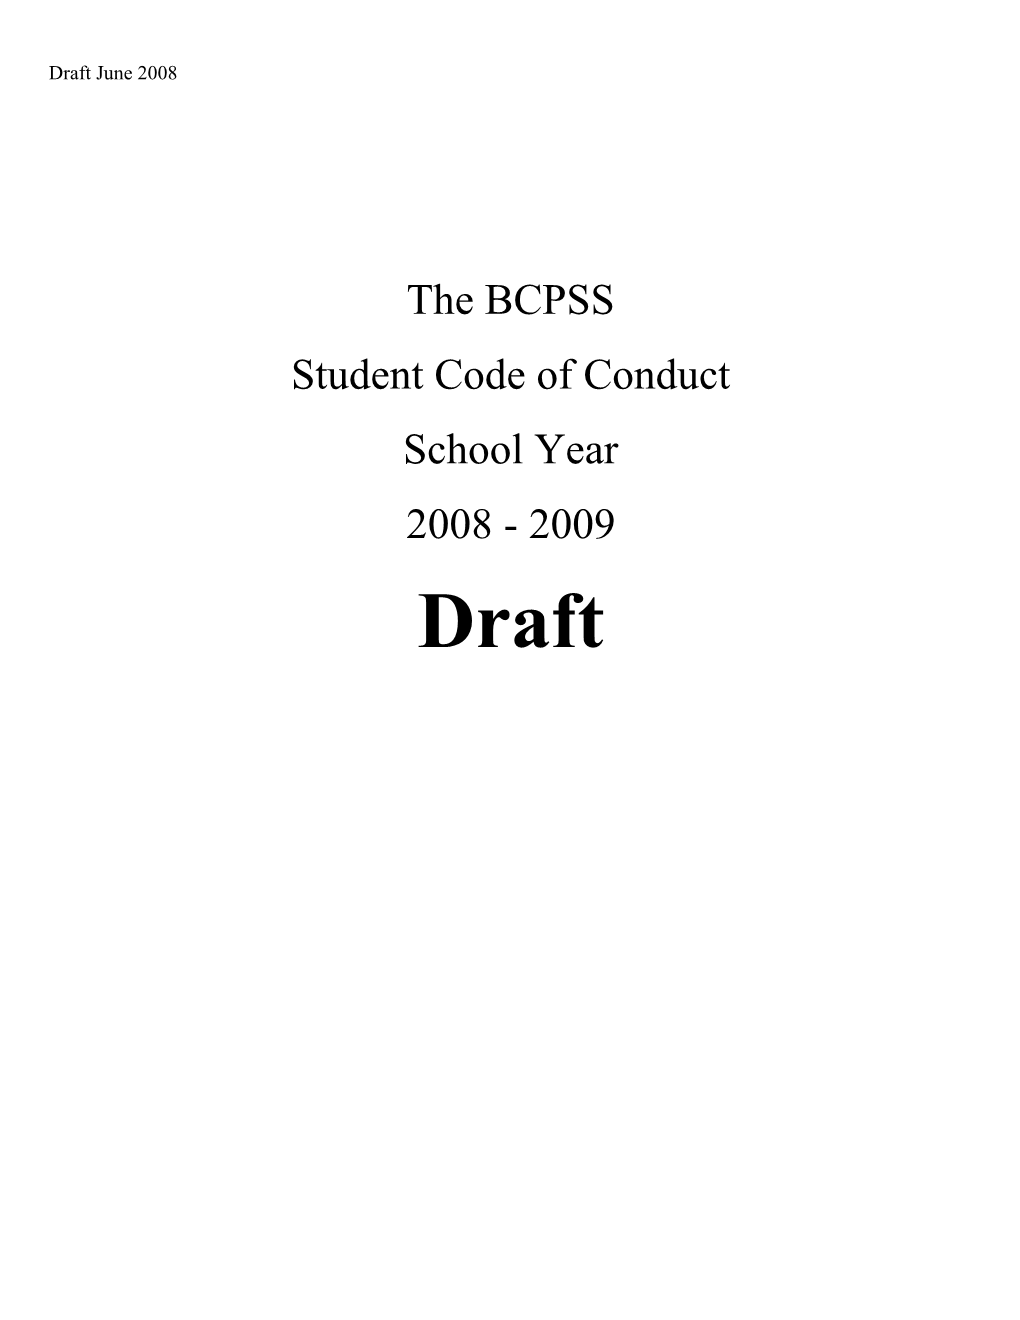 Student Code of Conduct s2